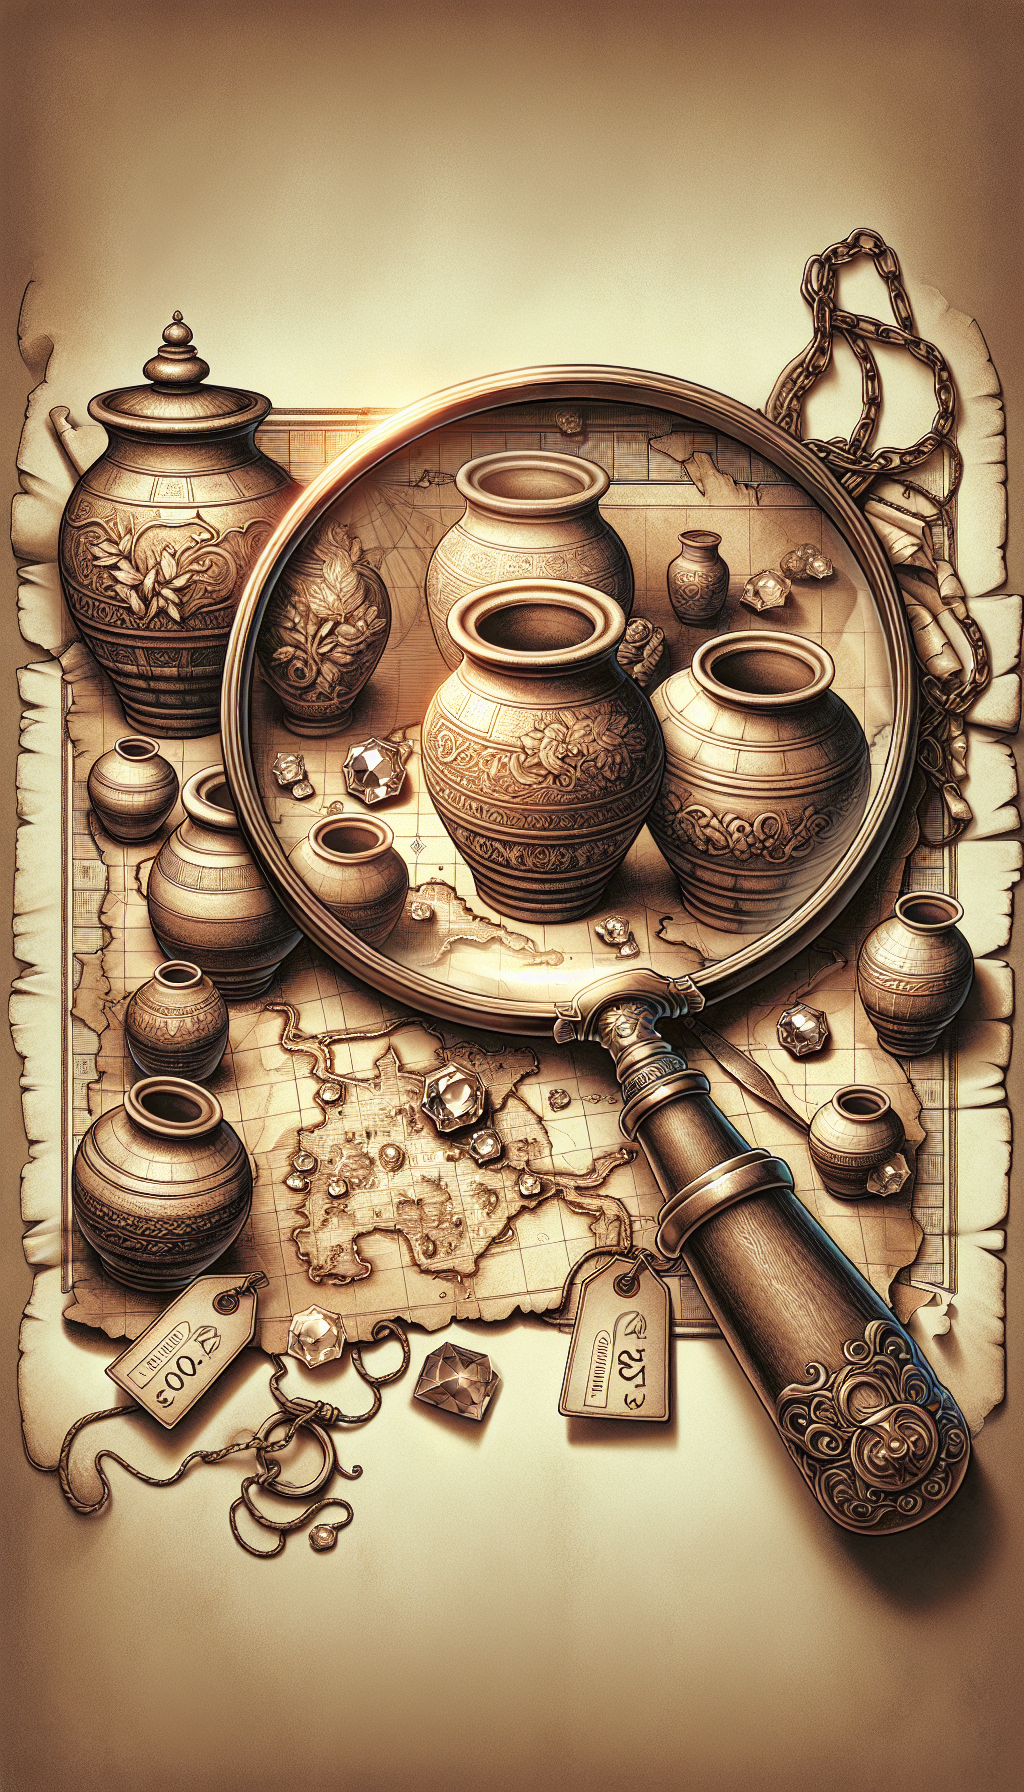 An intricate treasure map unfurls, with antique stoneware crocks as the landmarks, each distinct in design, eclipsed by a magnifying glass that spotlights a rare, jewel-encrusted crock at the map's X mark. Price tags dangle with hefty sums, suggesting the sky-high value of these collectible treasures, skillfully blending sepia tones with jewel-toned accents for an old-world-meets-luxury aesthetic.